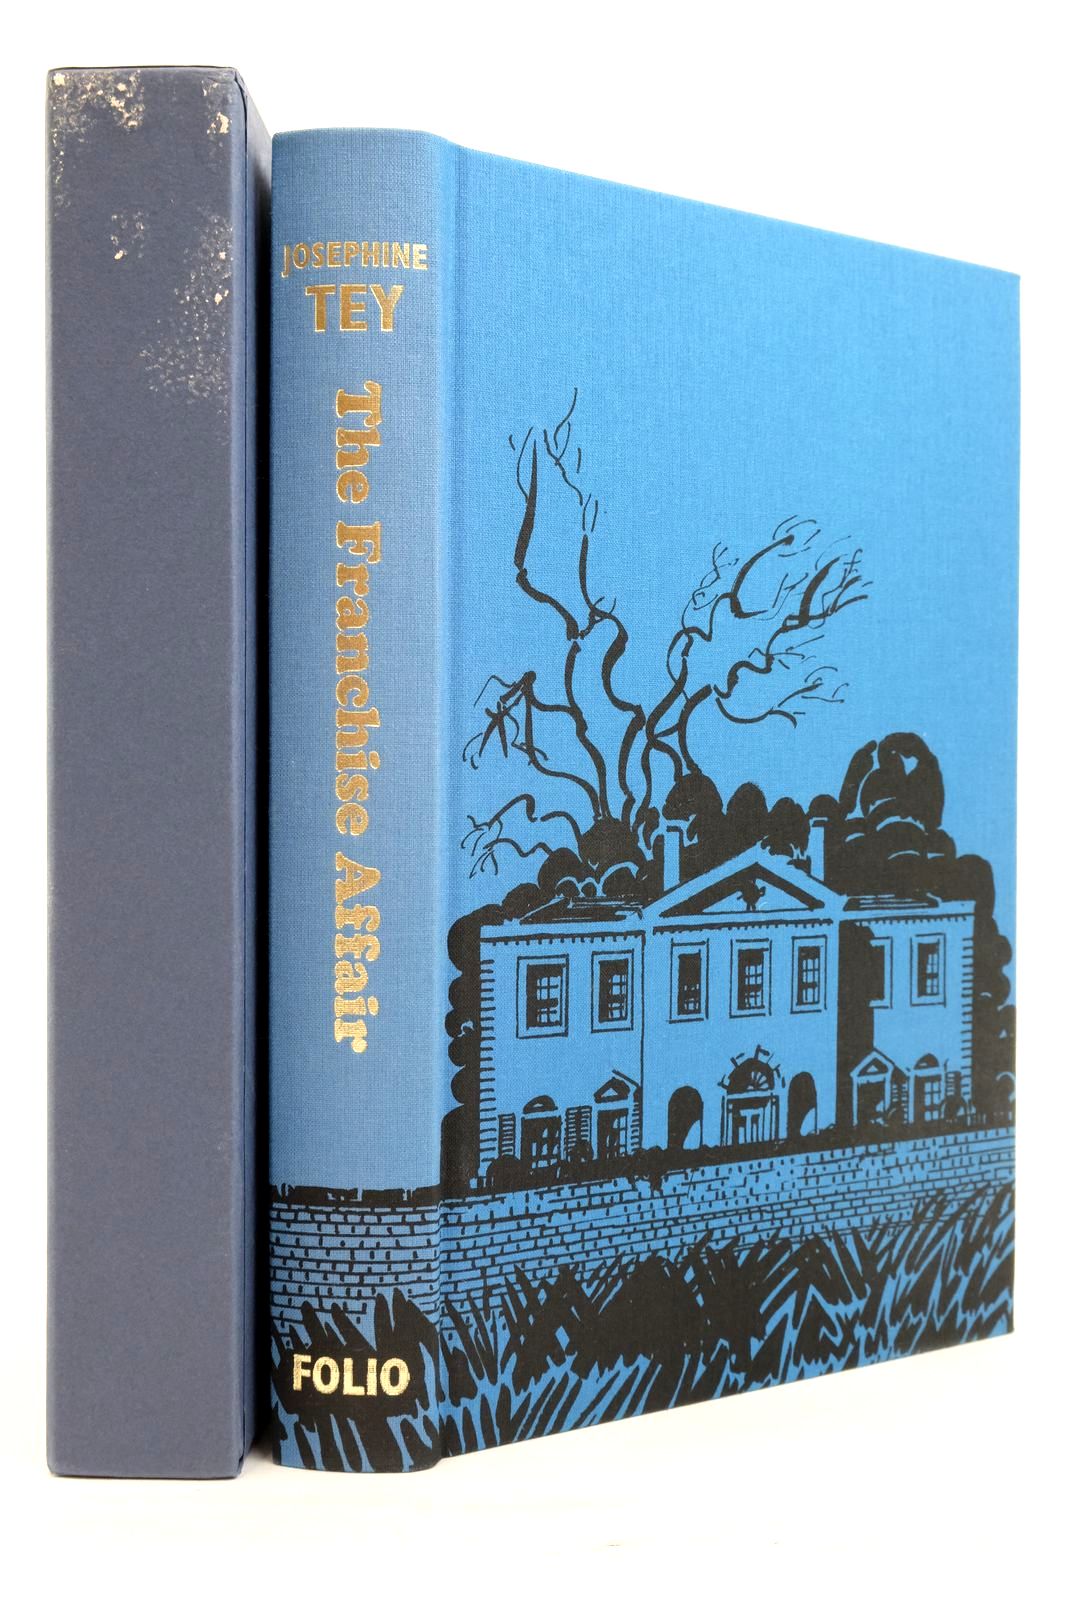 Photo of THE FRANCHISE AFFAIR written by Tey, Josephine Fraser, Antonia illustrated by Hogarth, Paul published by Folio Society (STOCK CODE: 2138109)  for sale by Stella & Rose's Books